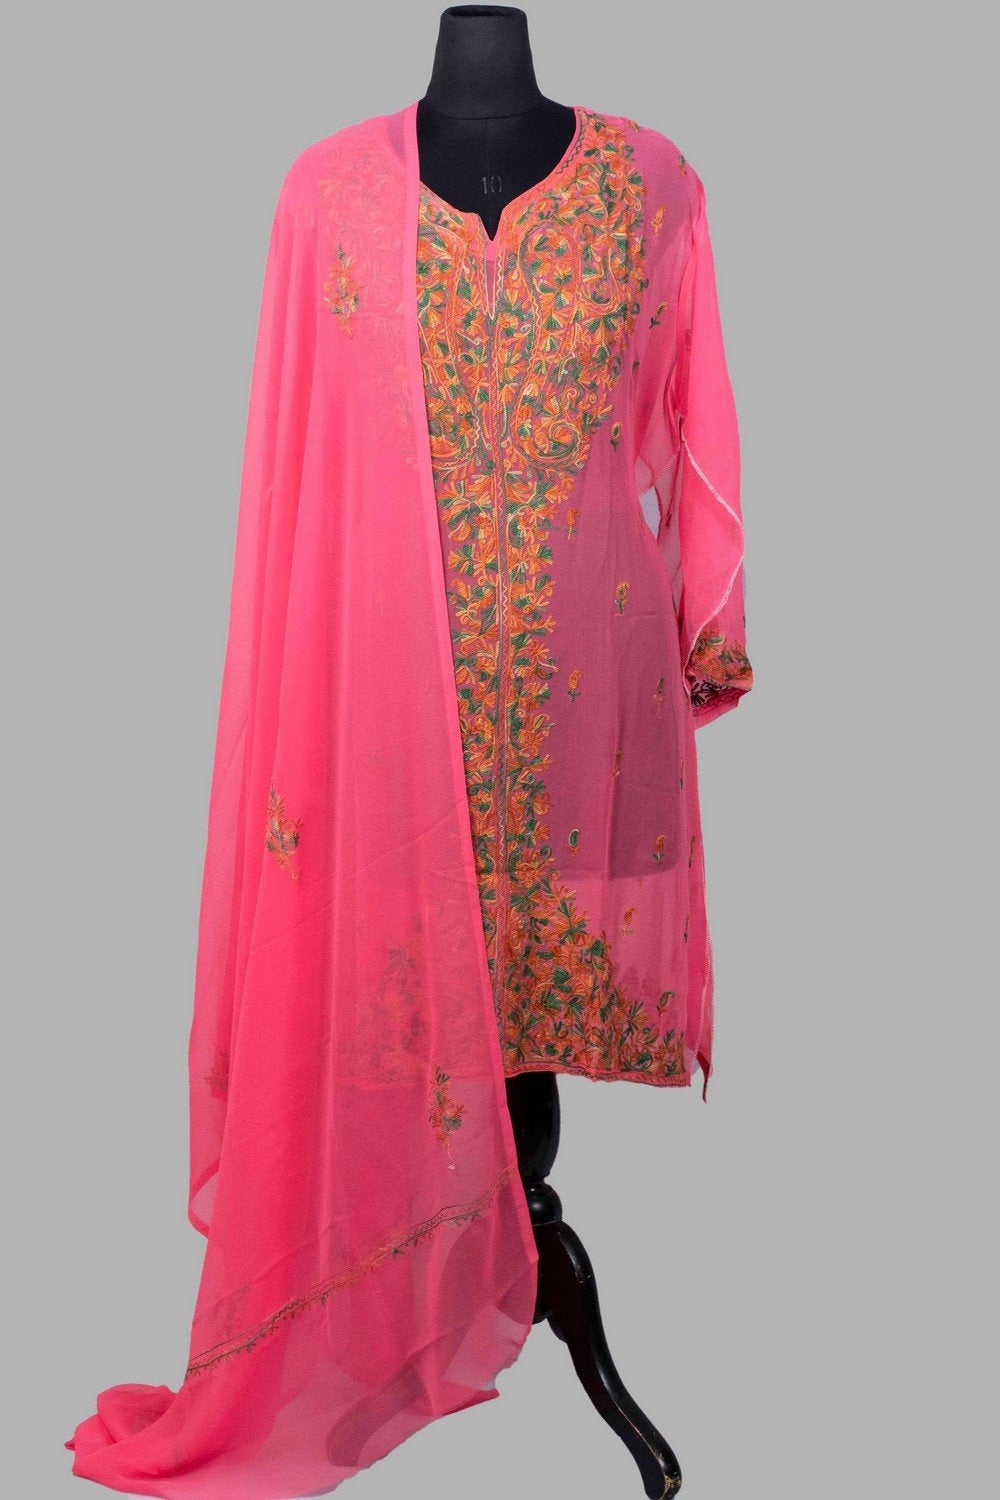 Pink Colour Aari Work Kurti With Golden Thread Embroidery